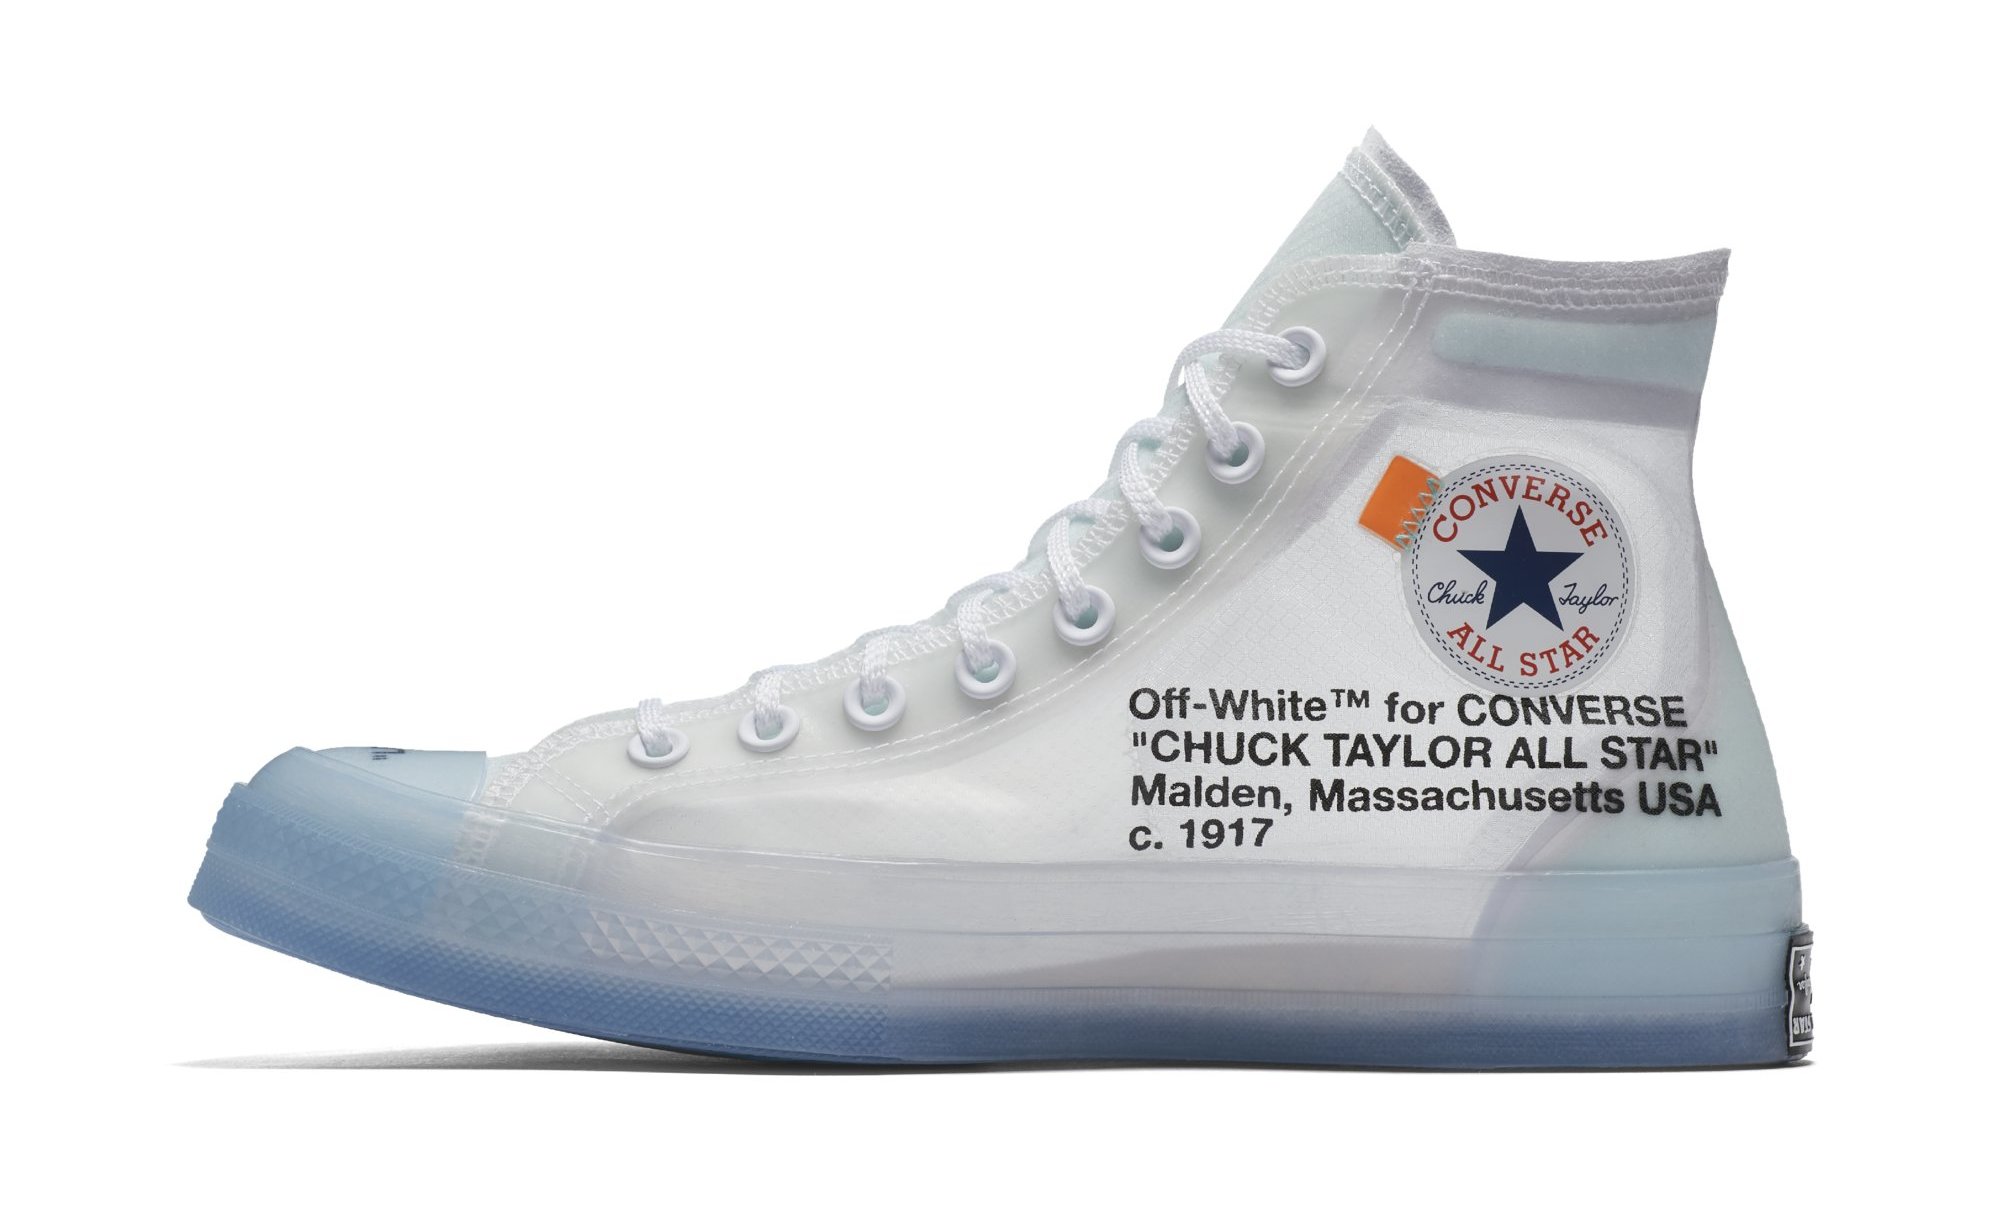 Off White x Converse Chuck Taylor All Star 70 162204C 102 (Medial)